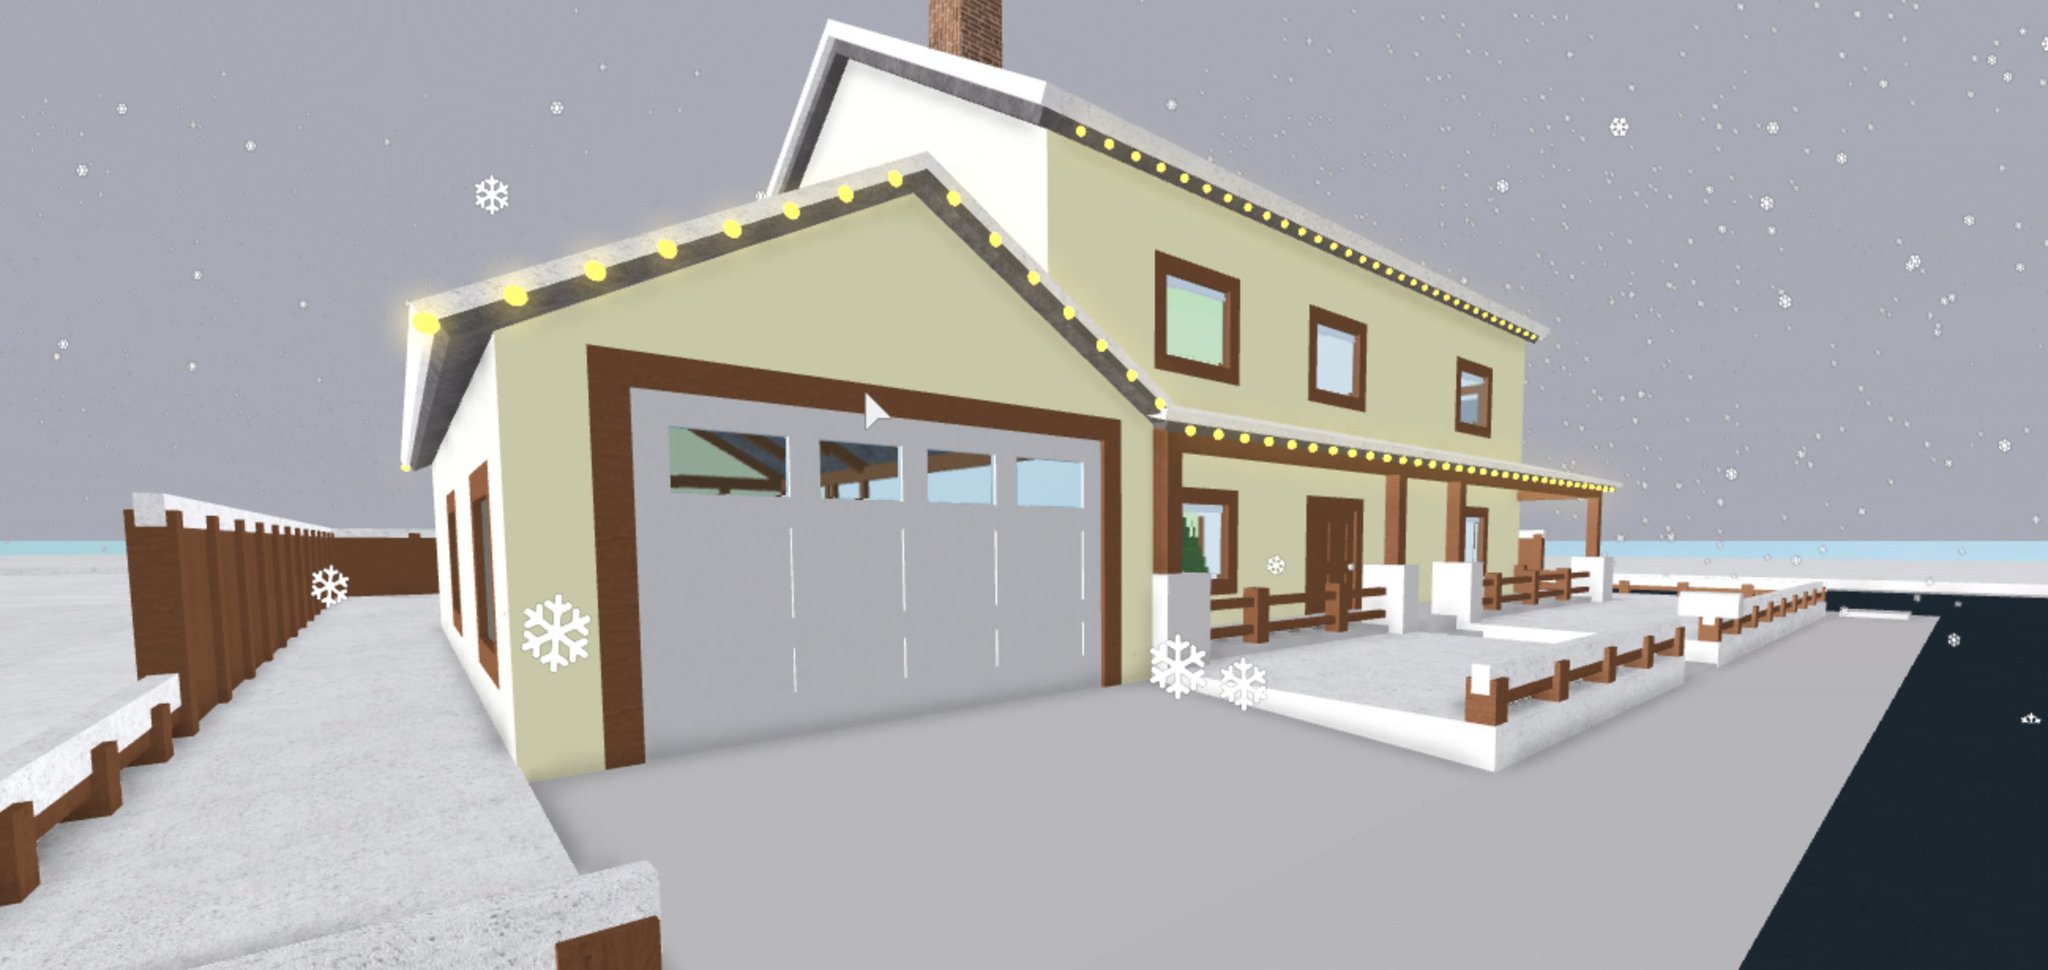 Nightcaller On Twitter Home Tycoon Has Officially Been Updated To Homestead Build A Home Role Play With Friends Celebrate The Holidays Https T Co Lxpnddqgy5 Https T Co Uujtgi21rc - roblox homestead script